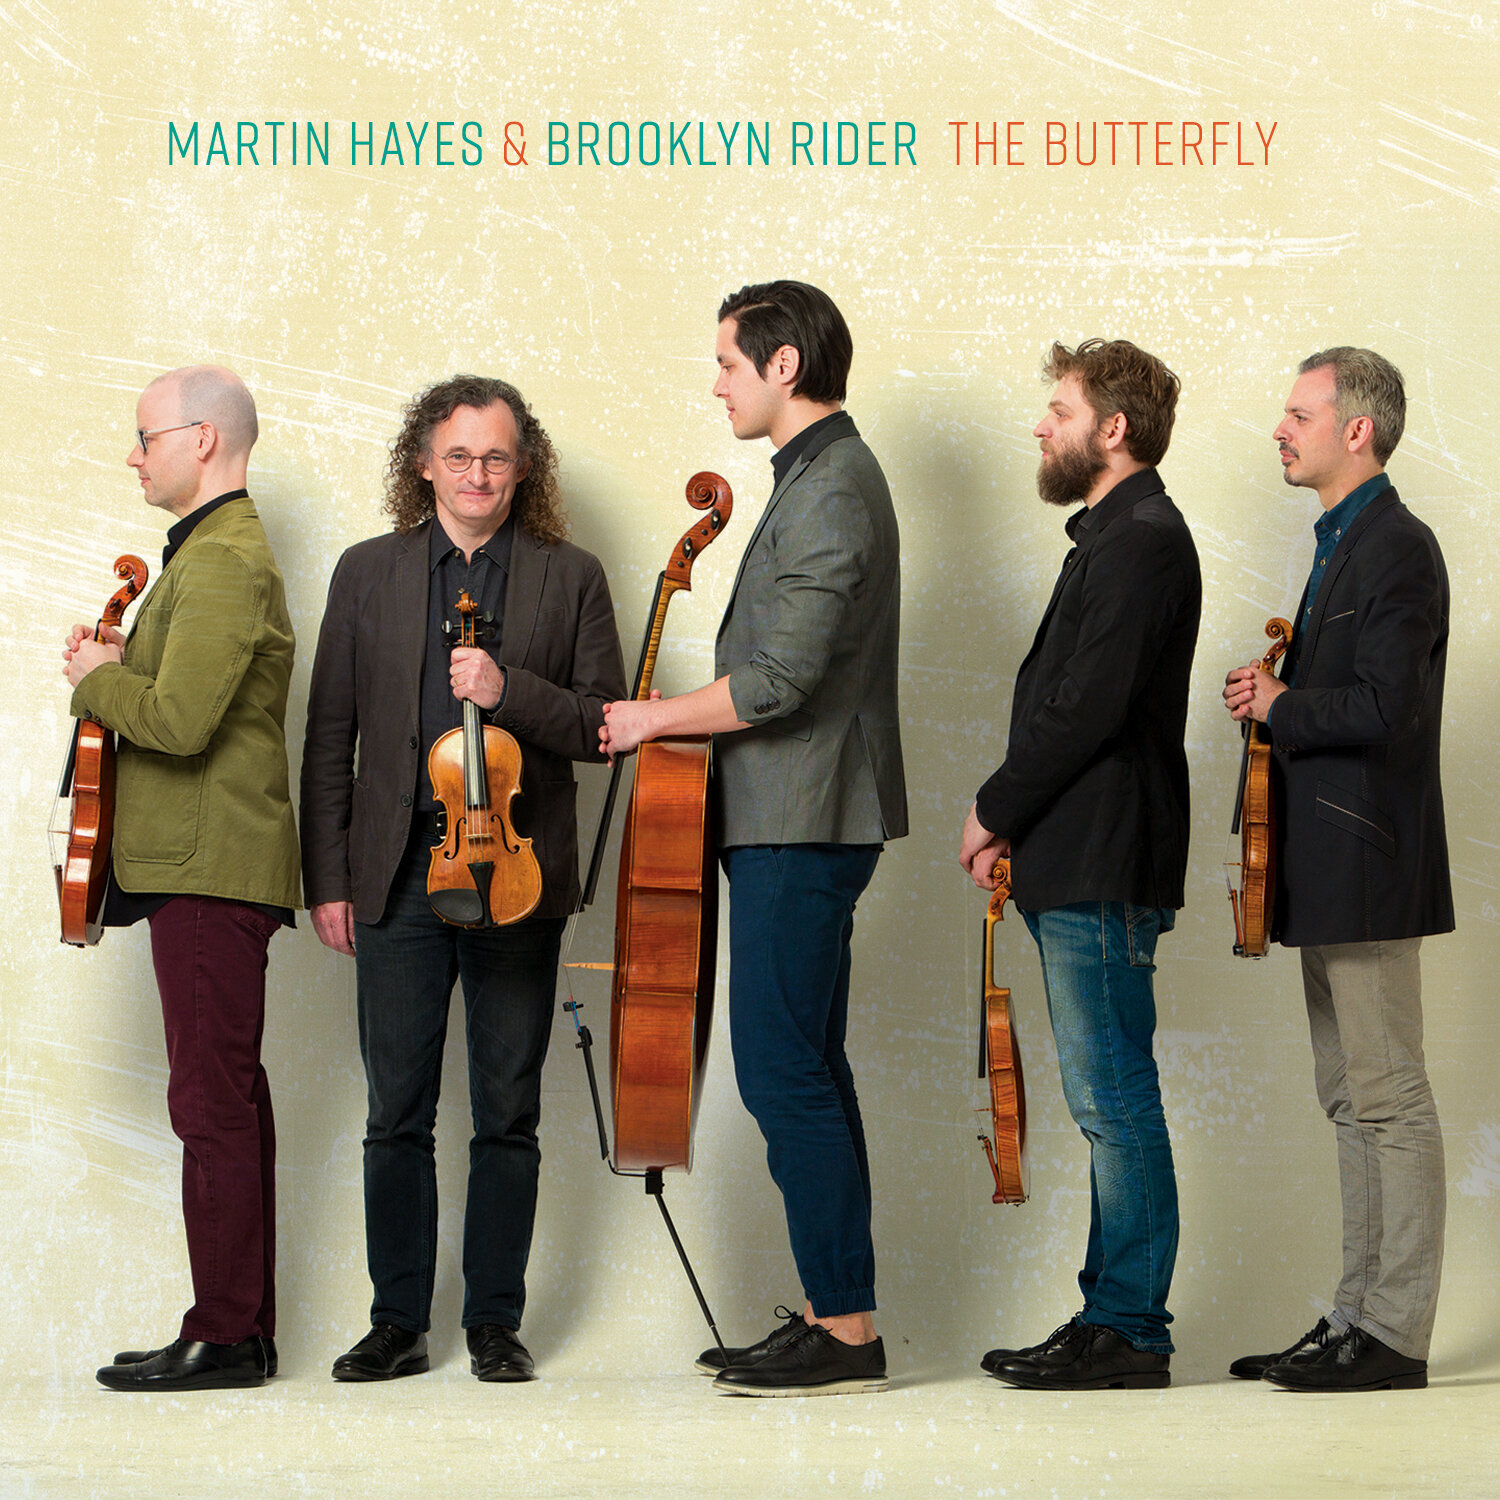 Martin Hayes & Brooklyn Rider - "The Butterfly" (2019) ICR012